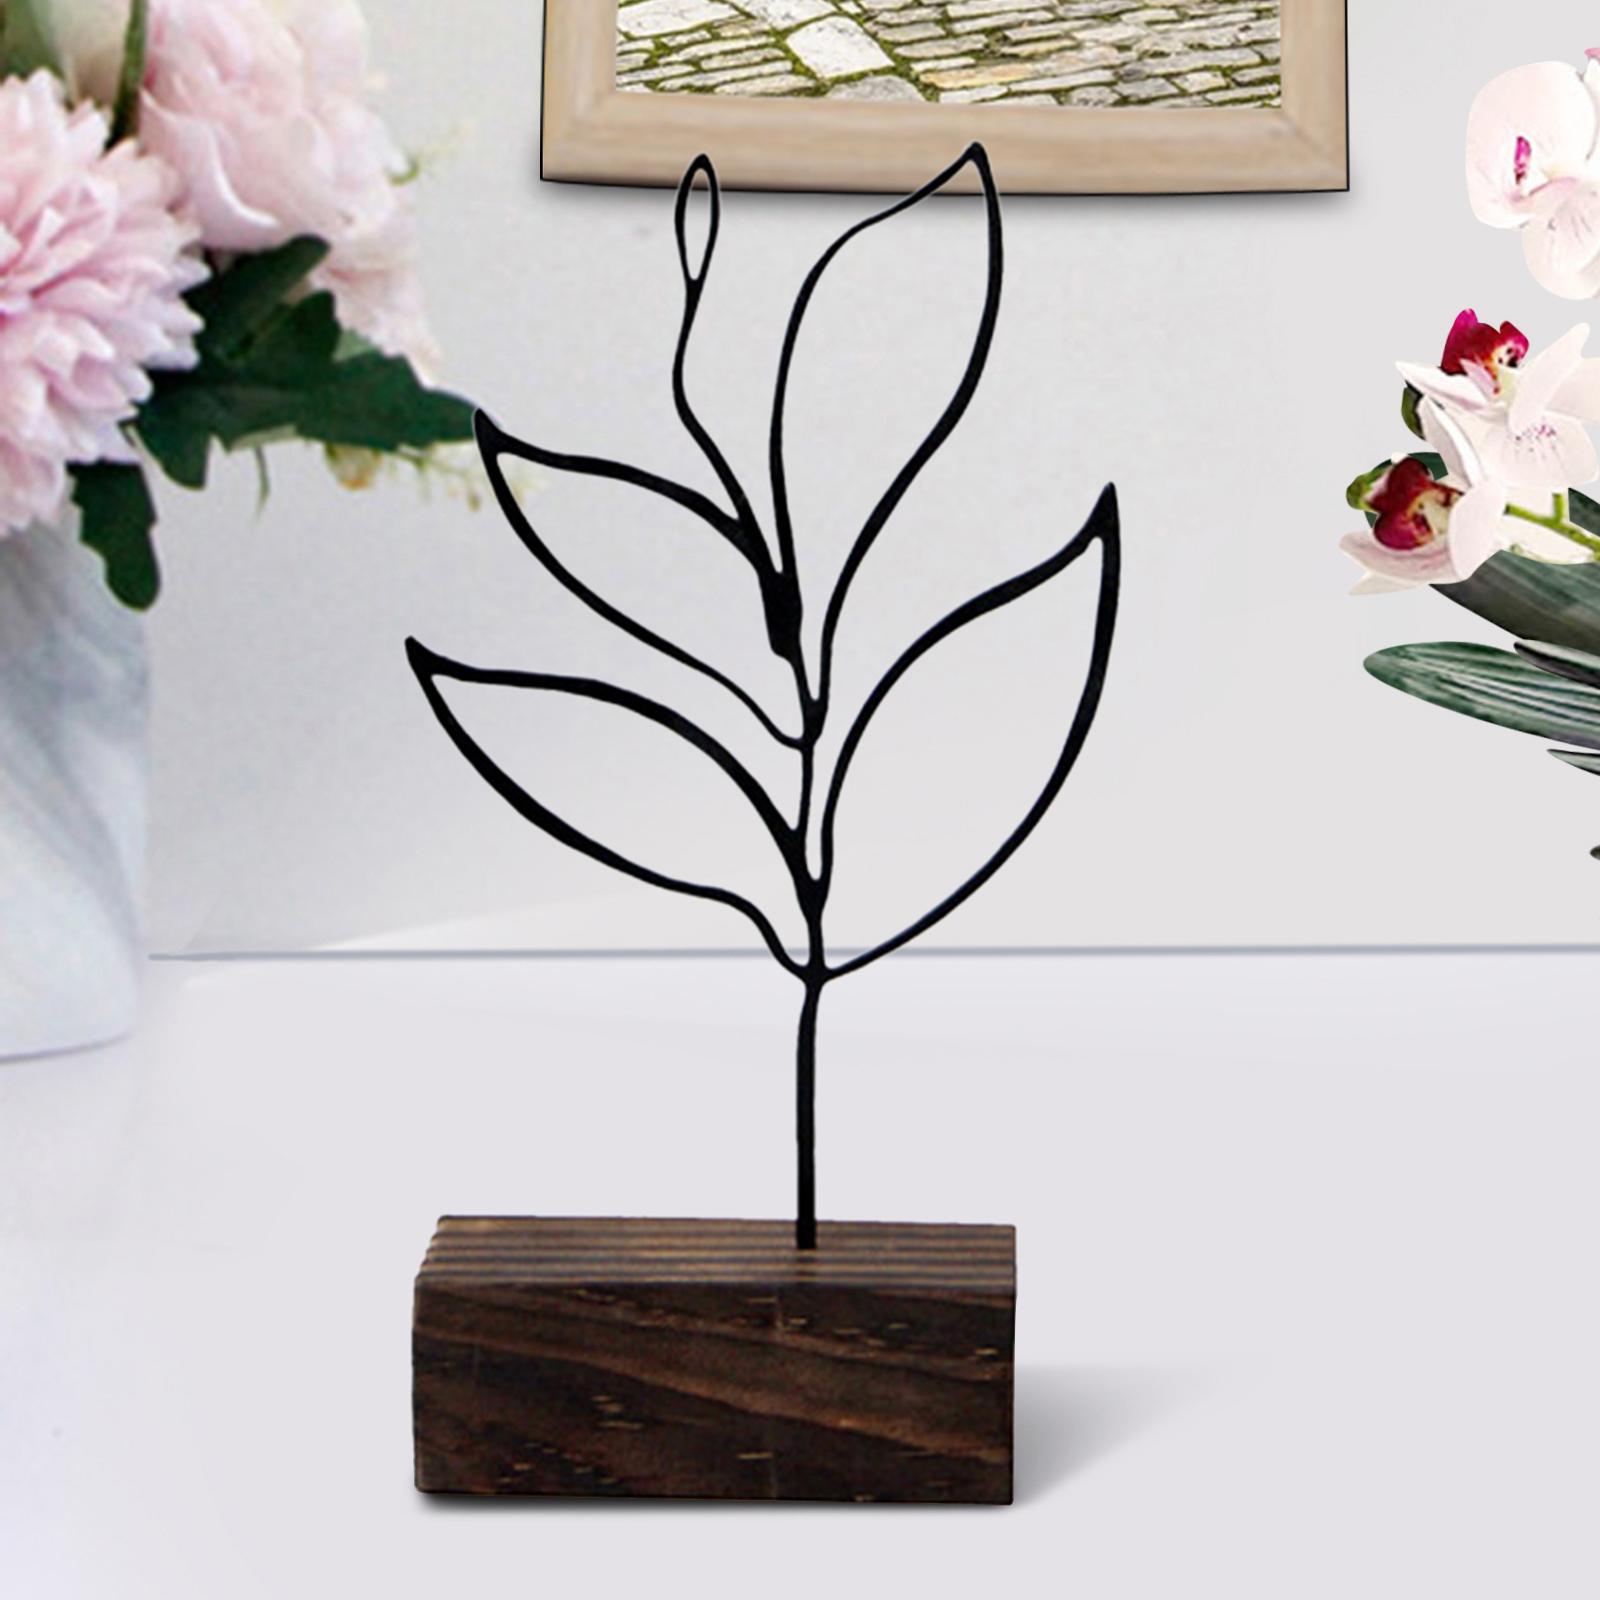 Leaf Ornament Sculpture Tabletop Accessories Photo Props Crafts Office Black